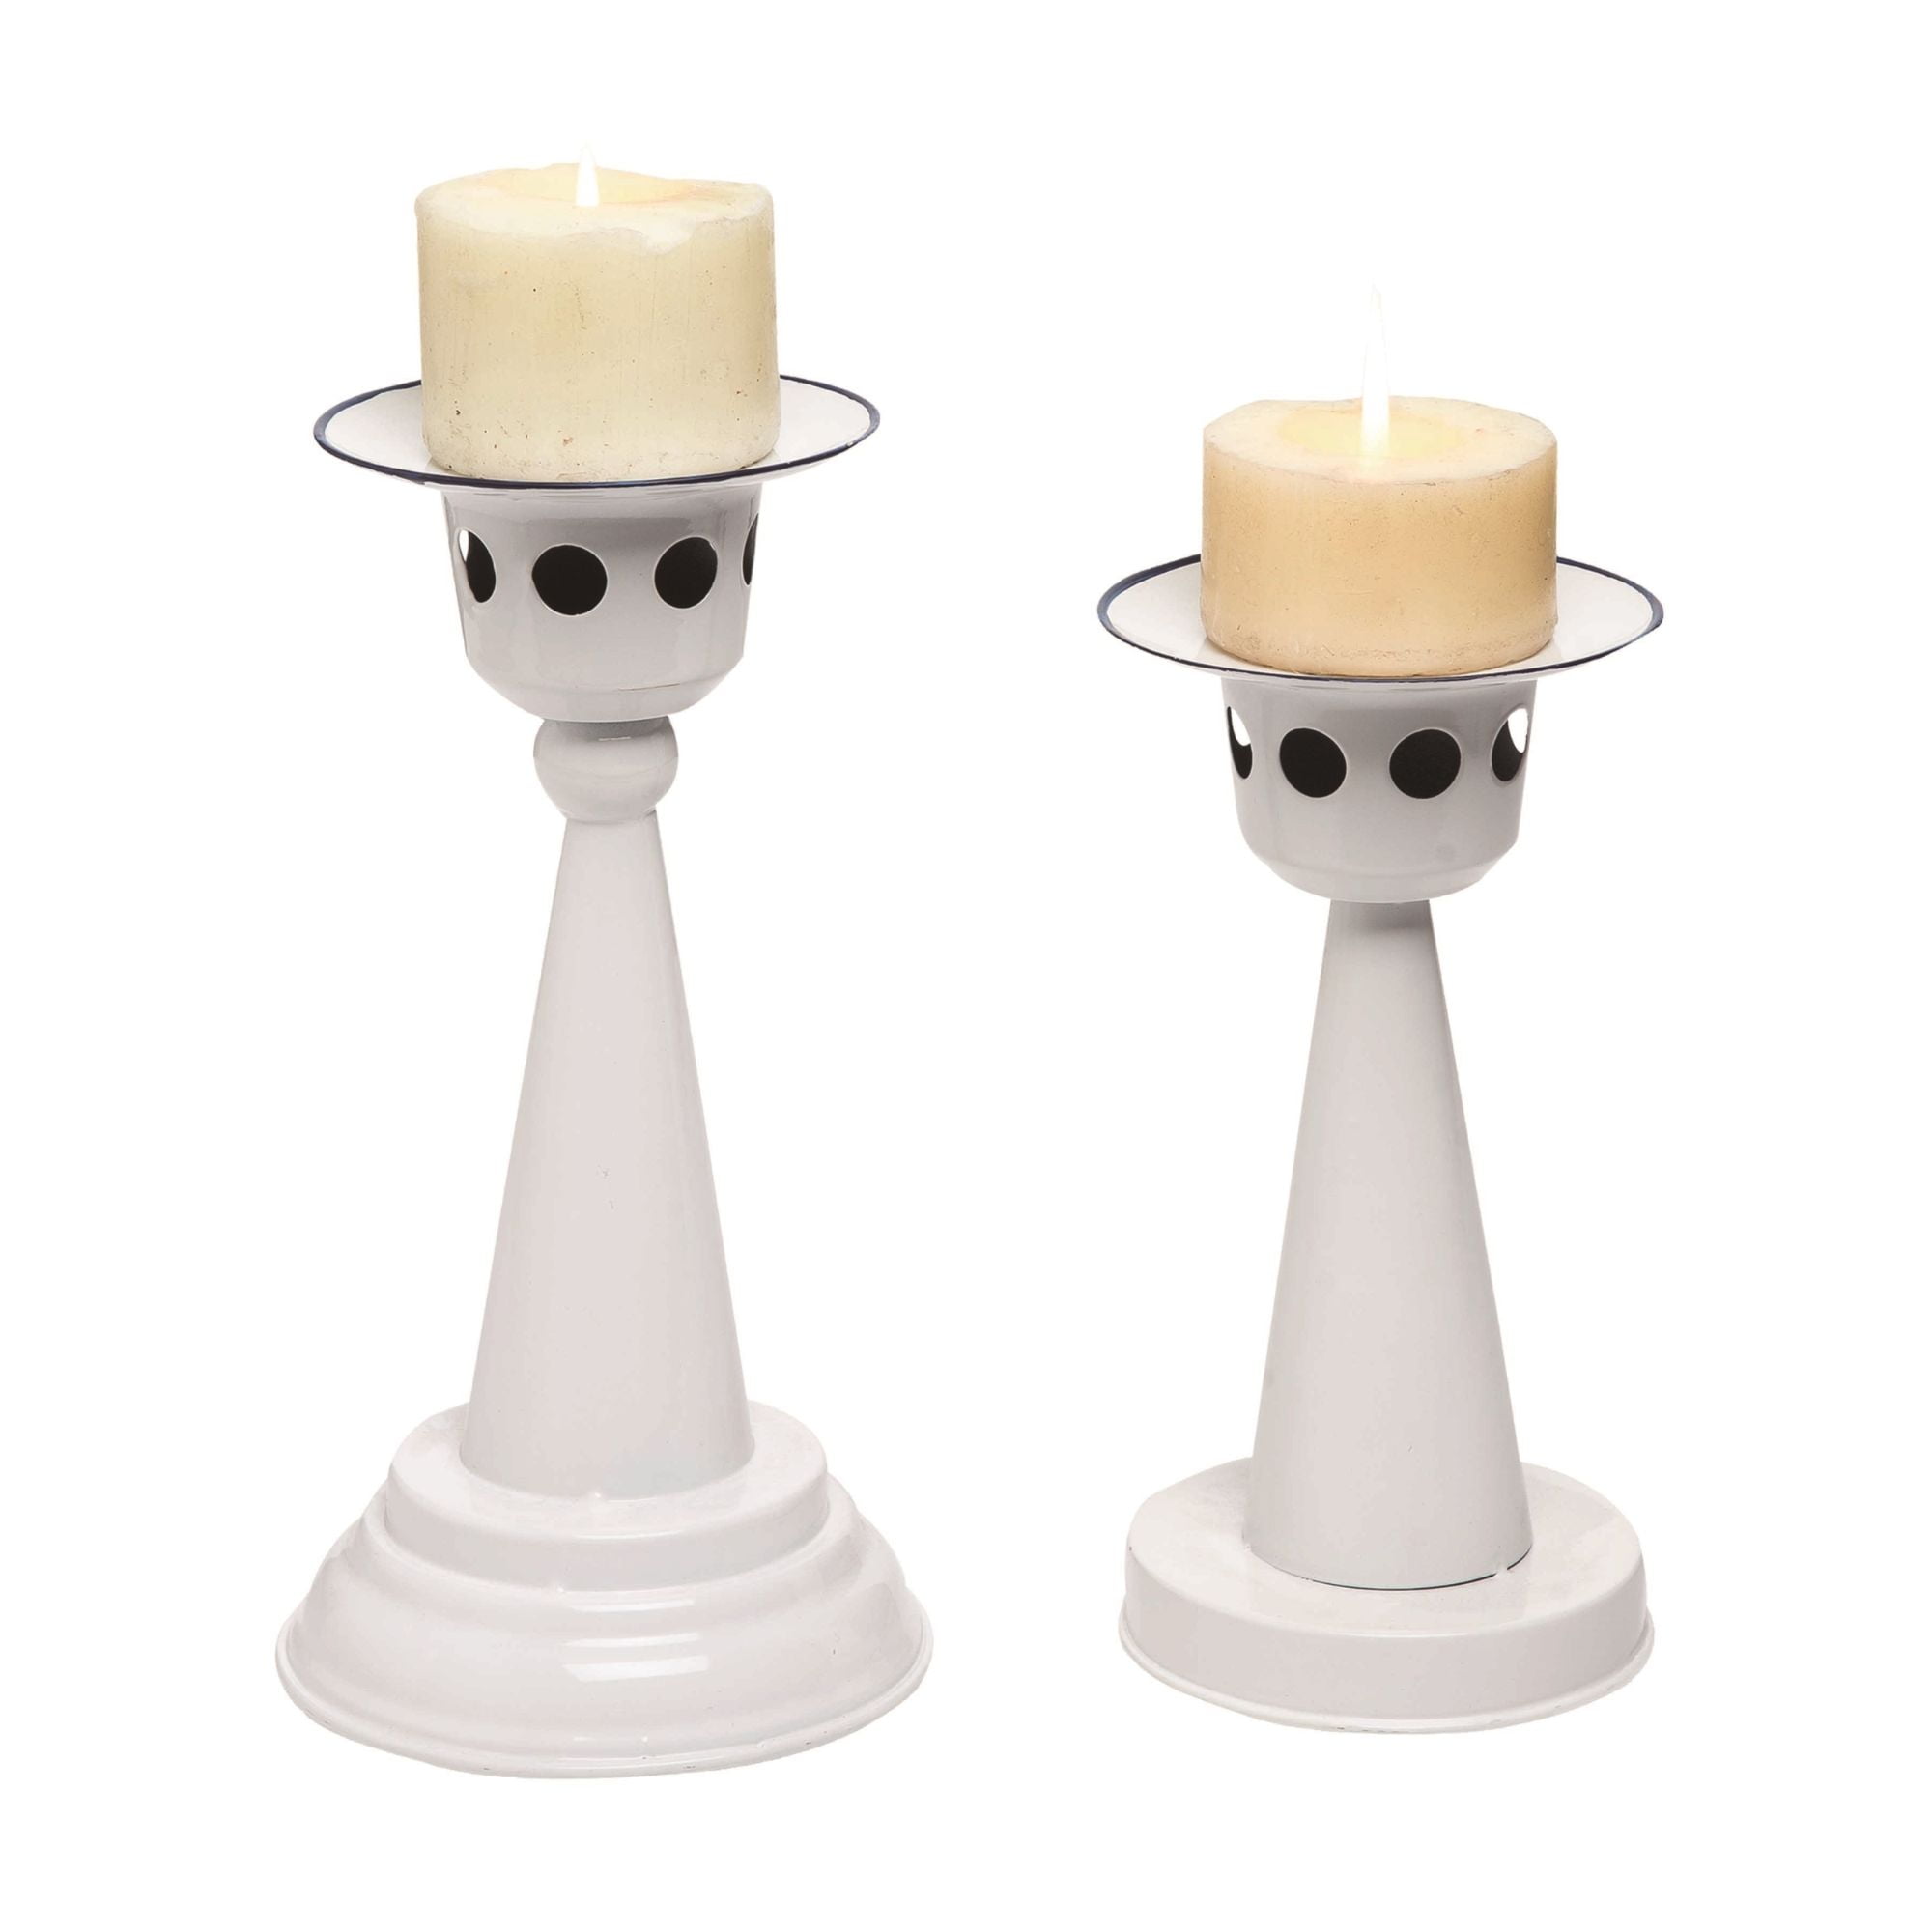 Set of 2 Rustic Enamel Pillar Candle holders or Realistic Candles with Timer 